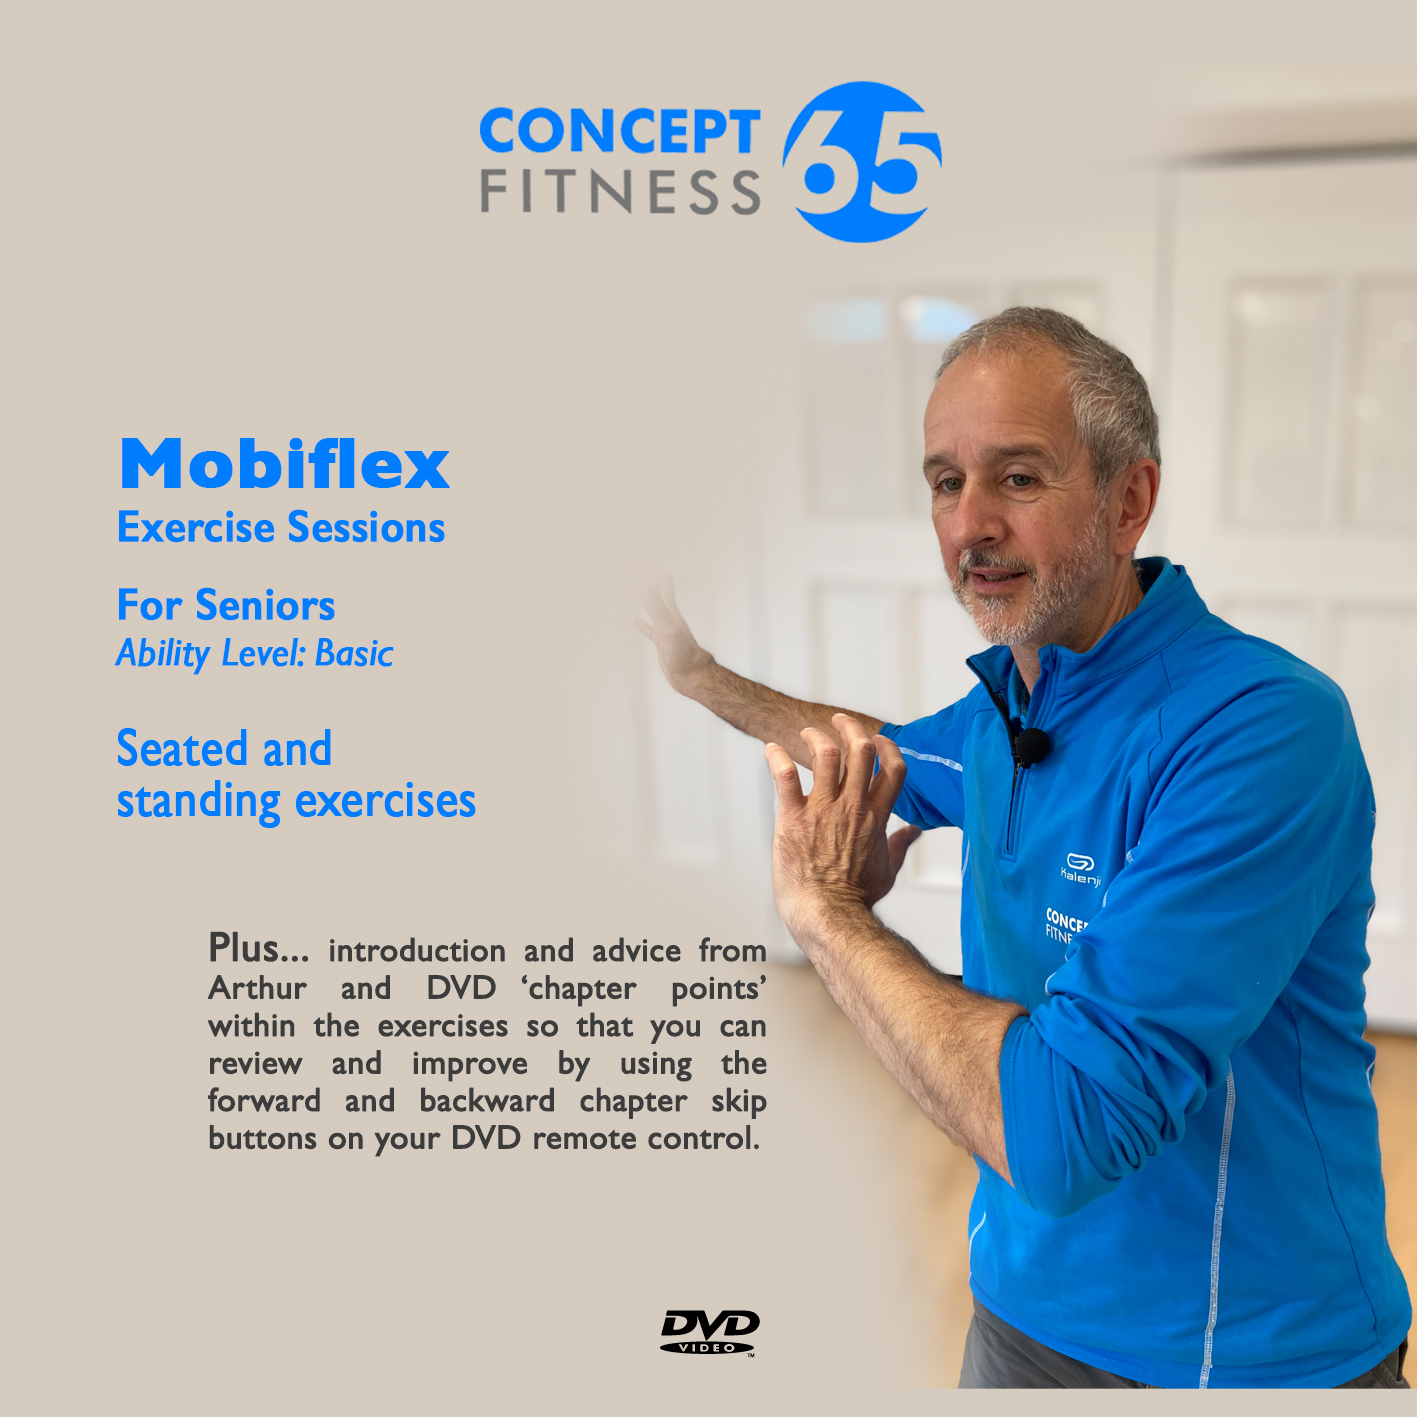 Concept 65 Fitness DVD Mobifle